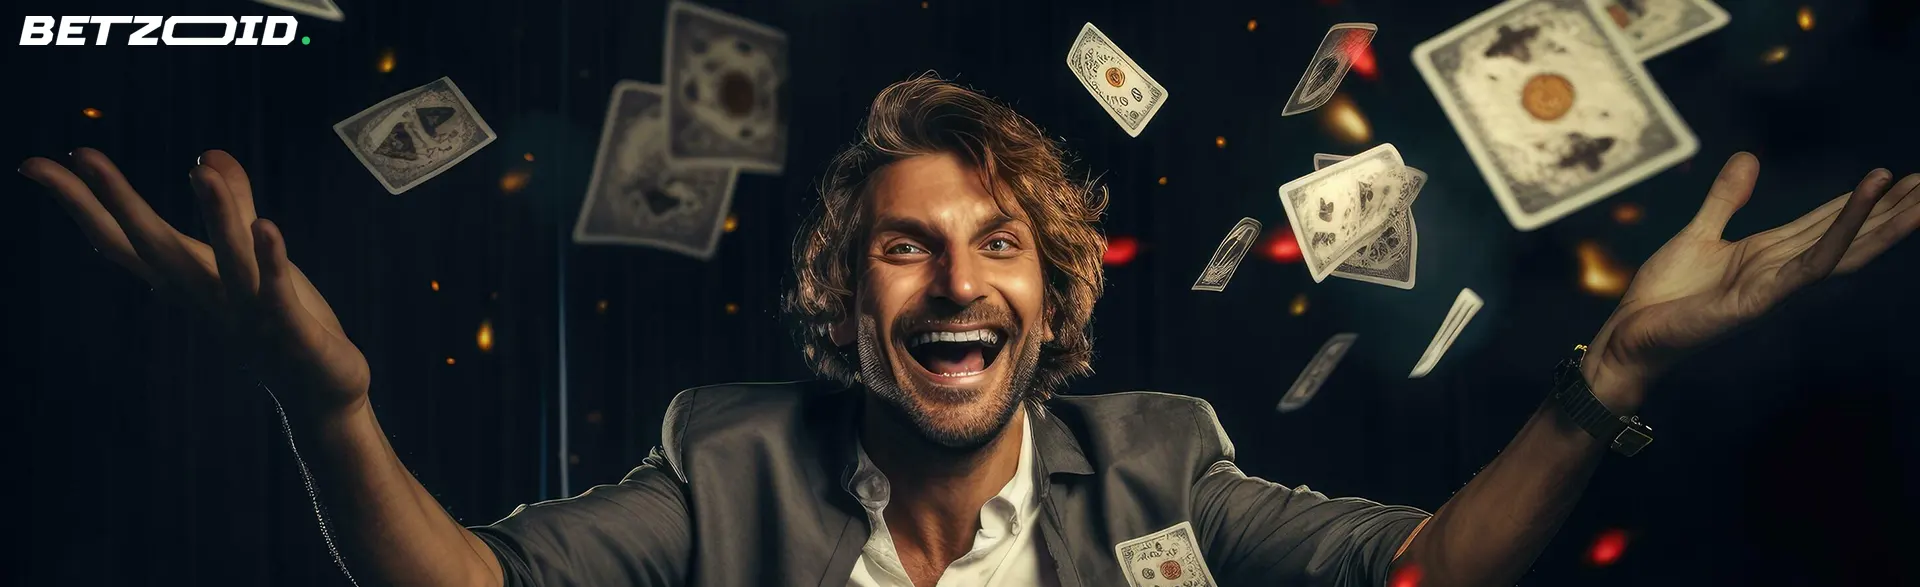 Man joyfully tossing playing cards in the air, embodying the excitement of winning at online casinos with the biggest jackpots in Canada.